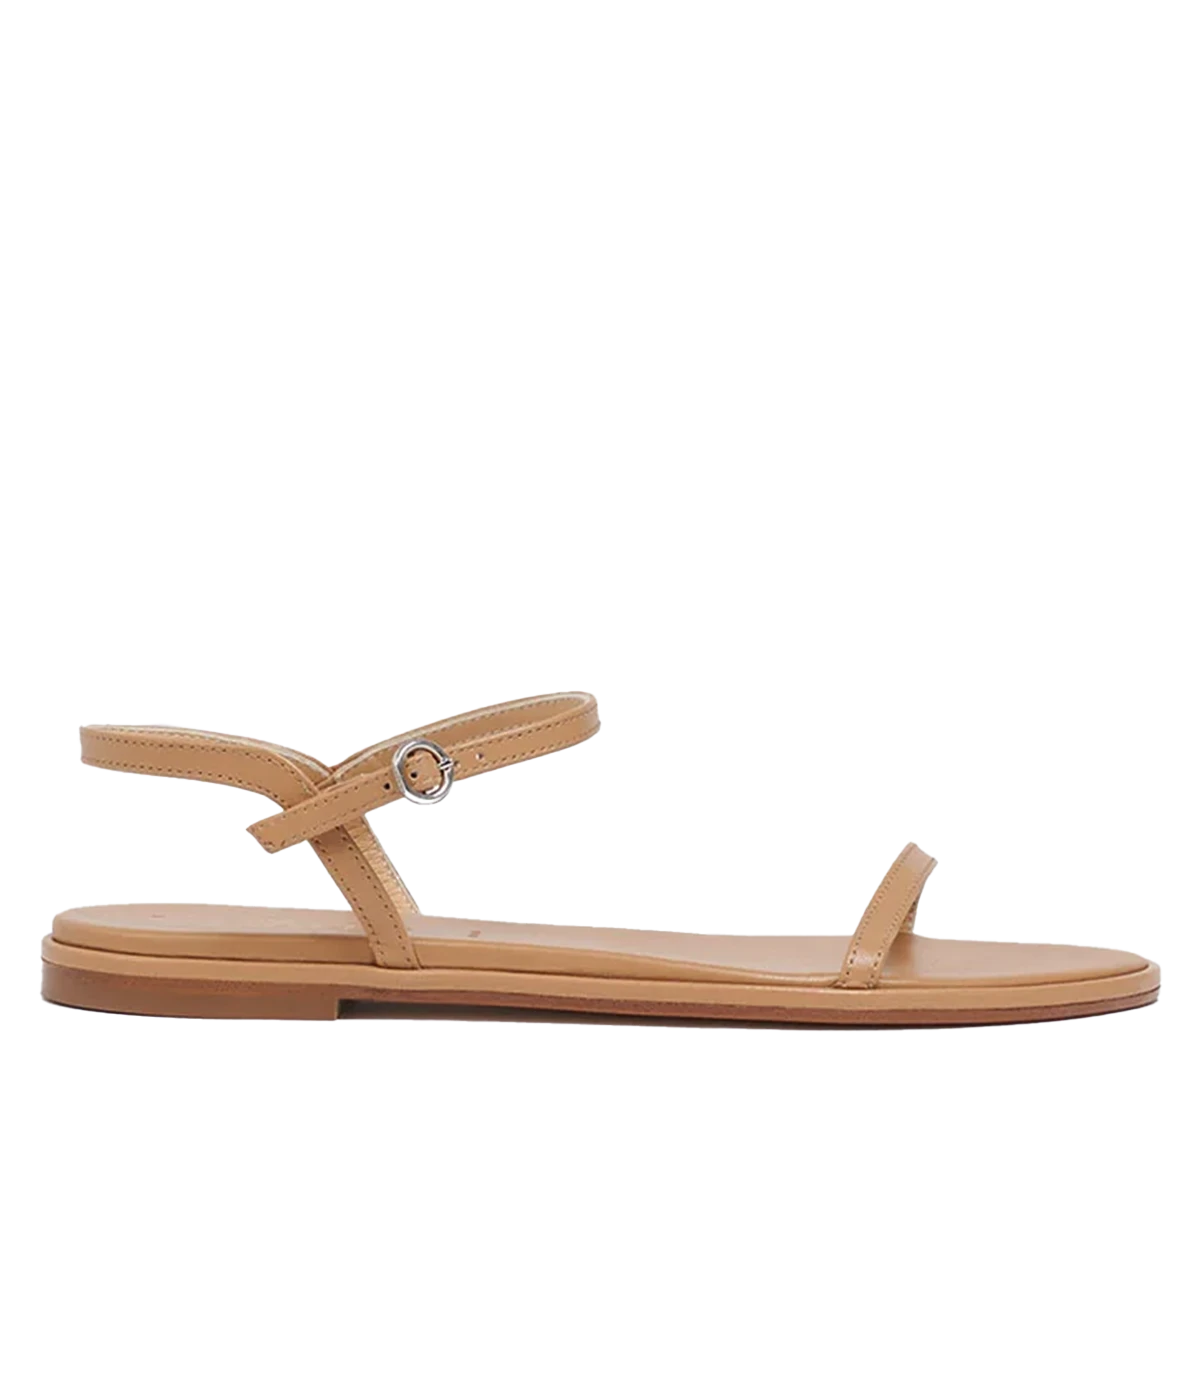  An everyday elevated flat sandal, with a minimalist design, ankle buckle strap, leather and toe strap all in a hazelnut colourway. Made in Italy, comfortable, Europe summer, everyday sandal.  